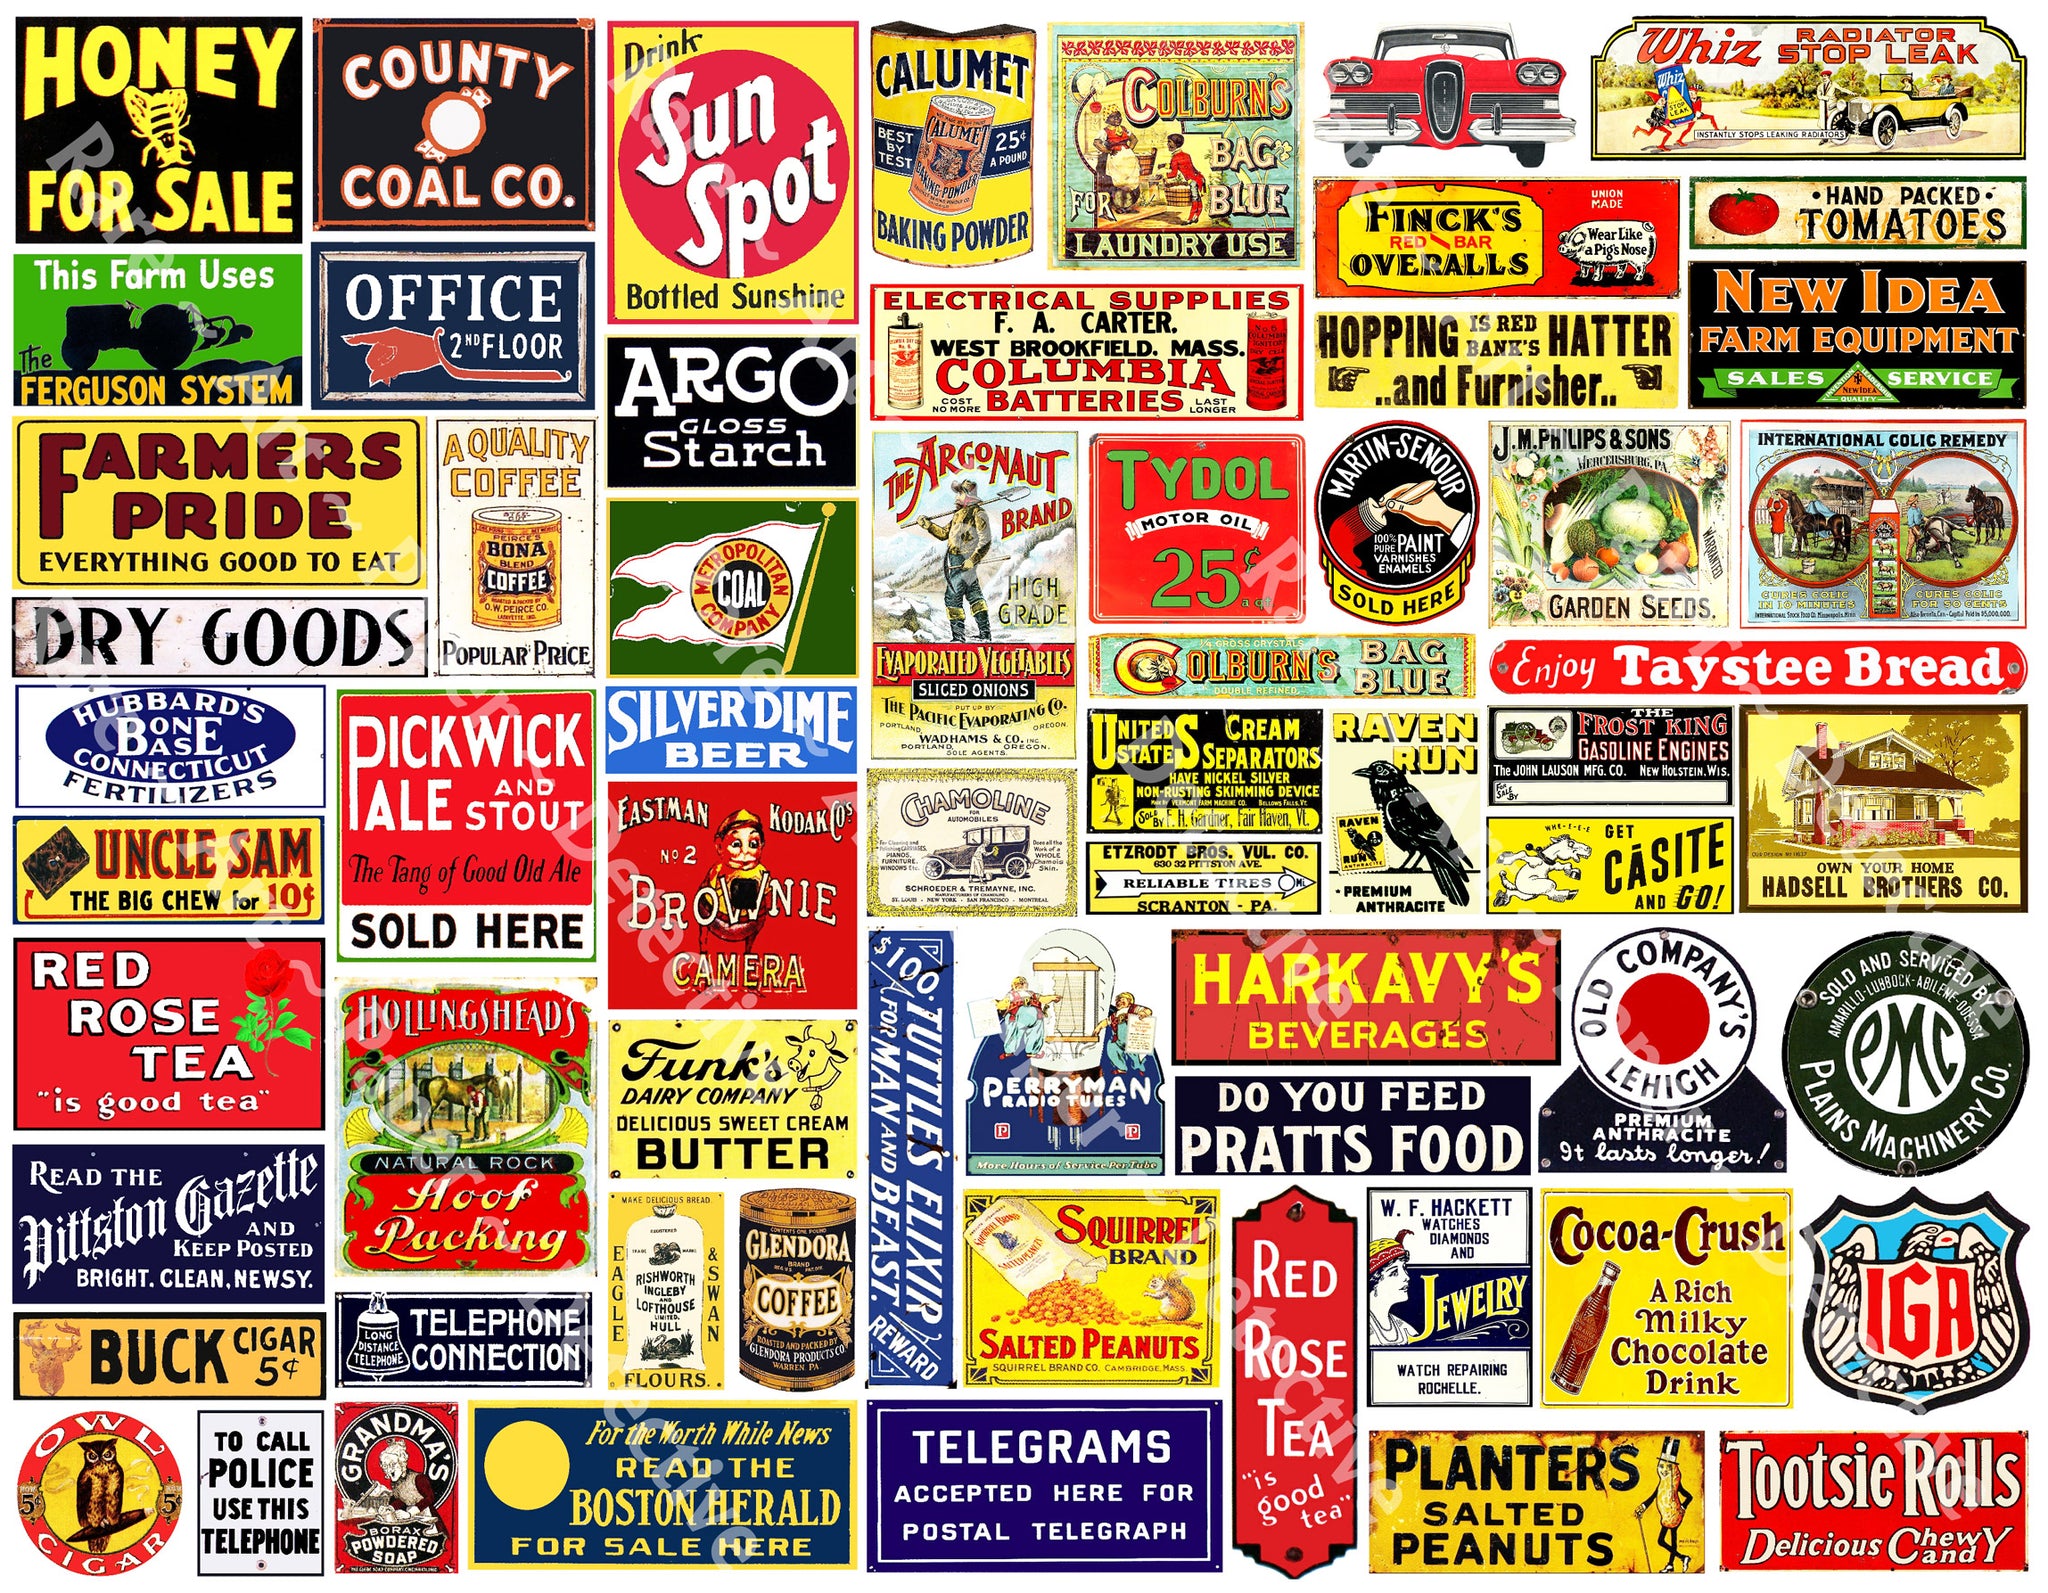 Model Railroad & Dollhouse Signs, Sticker Sheet, 68 Multi Scale Hobby Images, Miniature Vintage Advertising Signs for Train Layouts, #1087